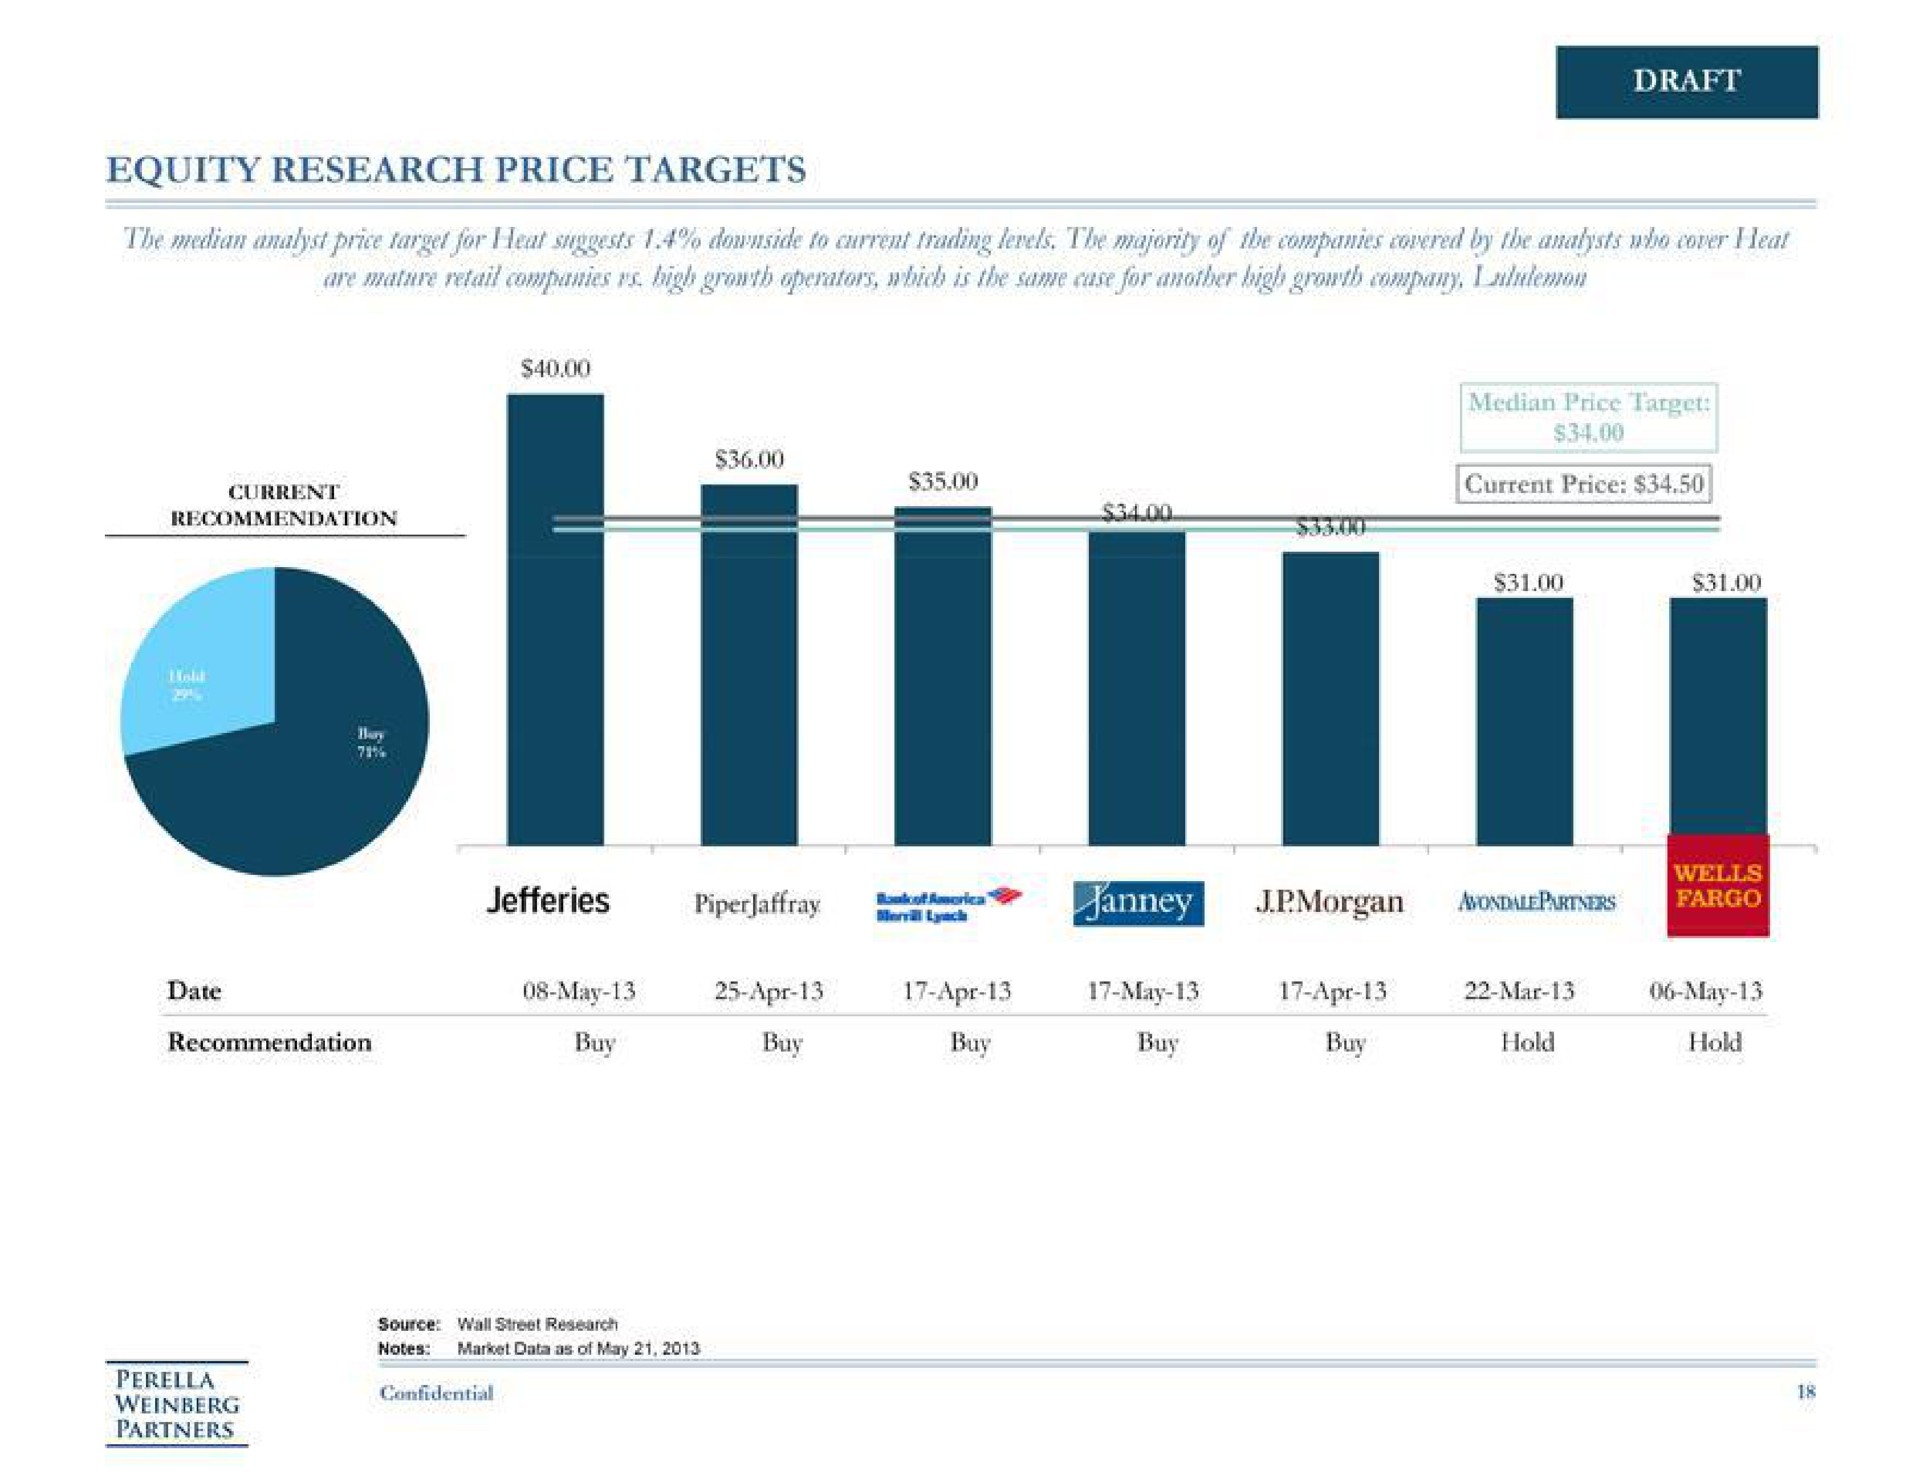 equity research price targets draft pee | Perella Weinberg Partners